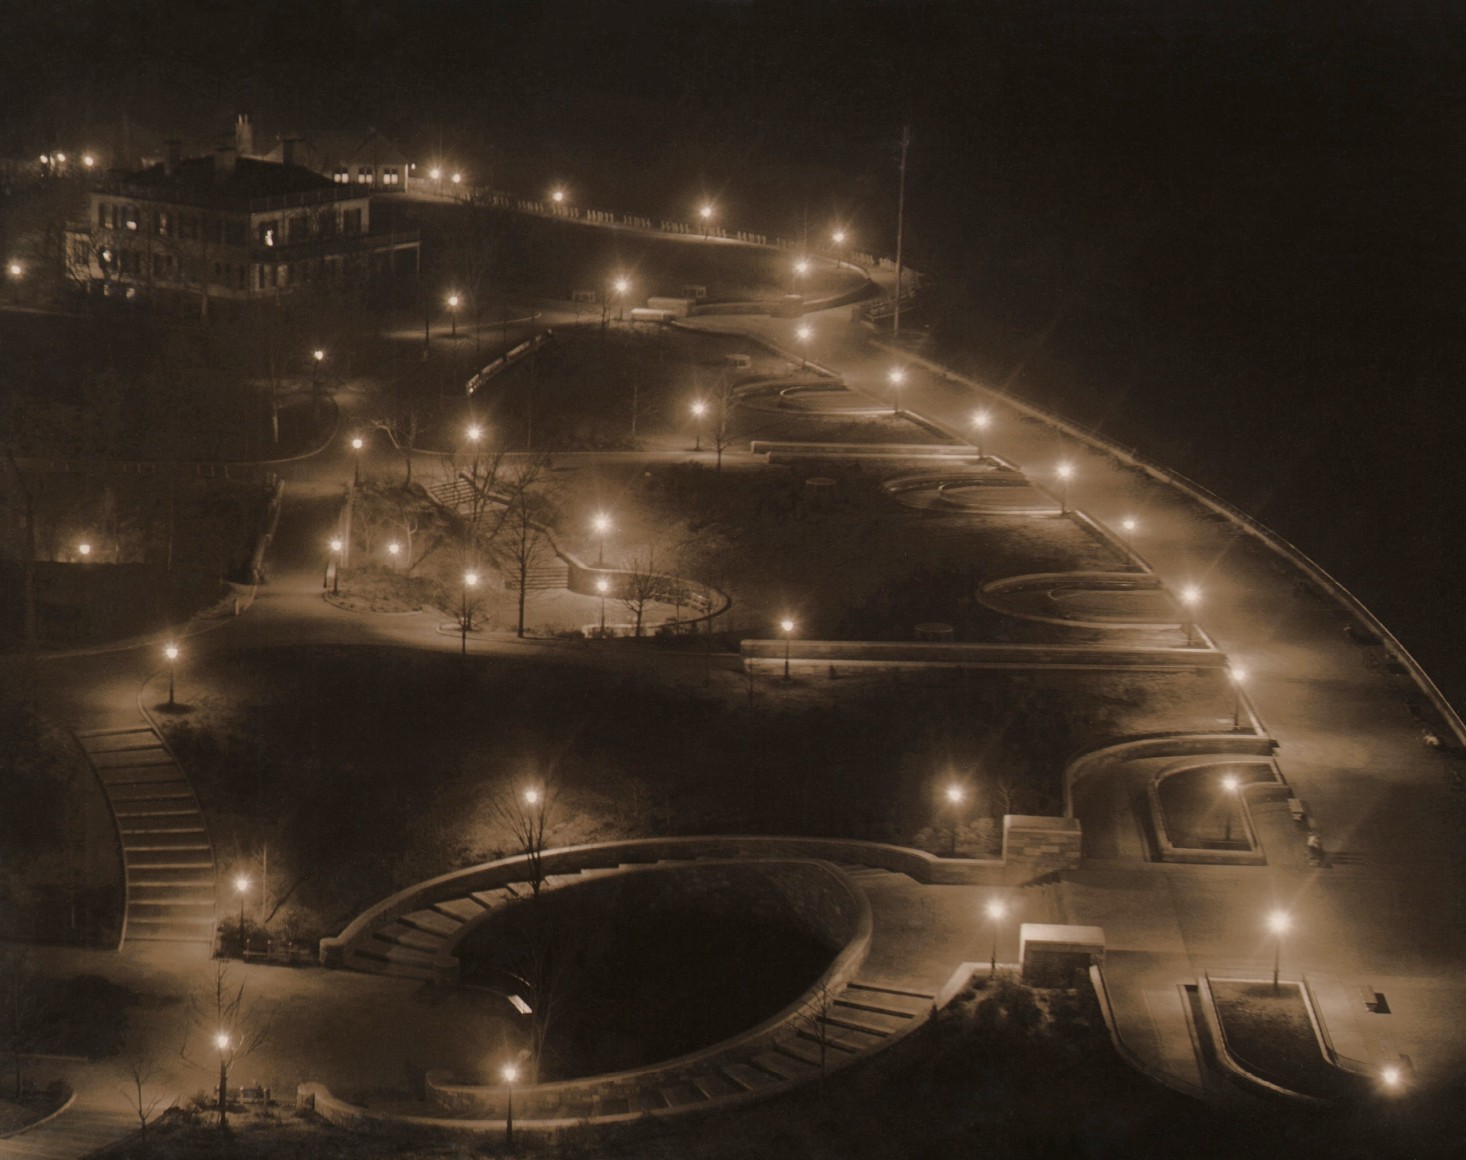 Paul J. Woolf, Carl Schurz Park, ​c. 1935. Night time view of a park with street lights illuminating various walking paths and stairways.